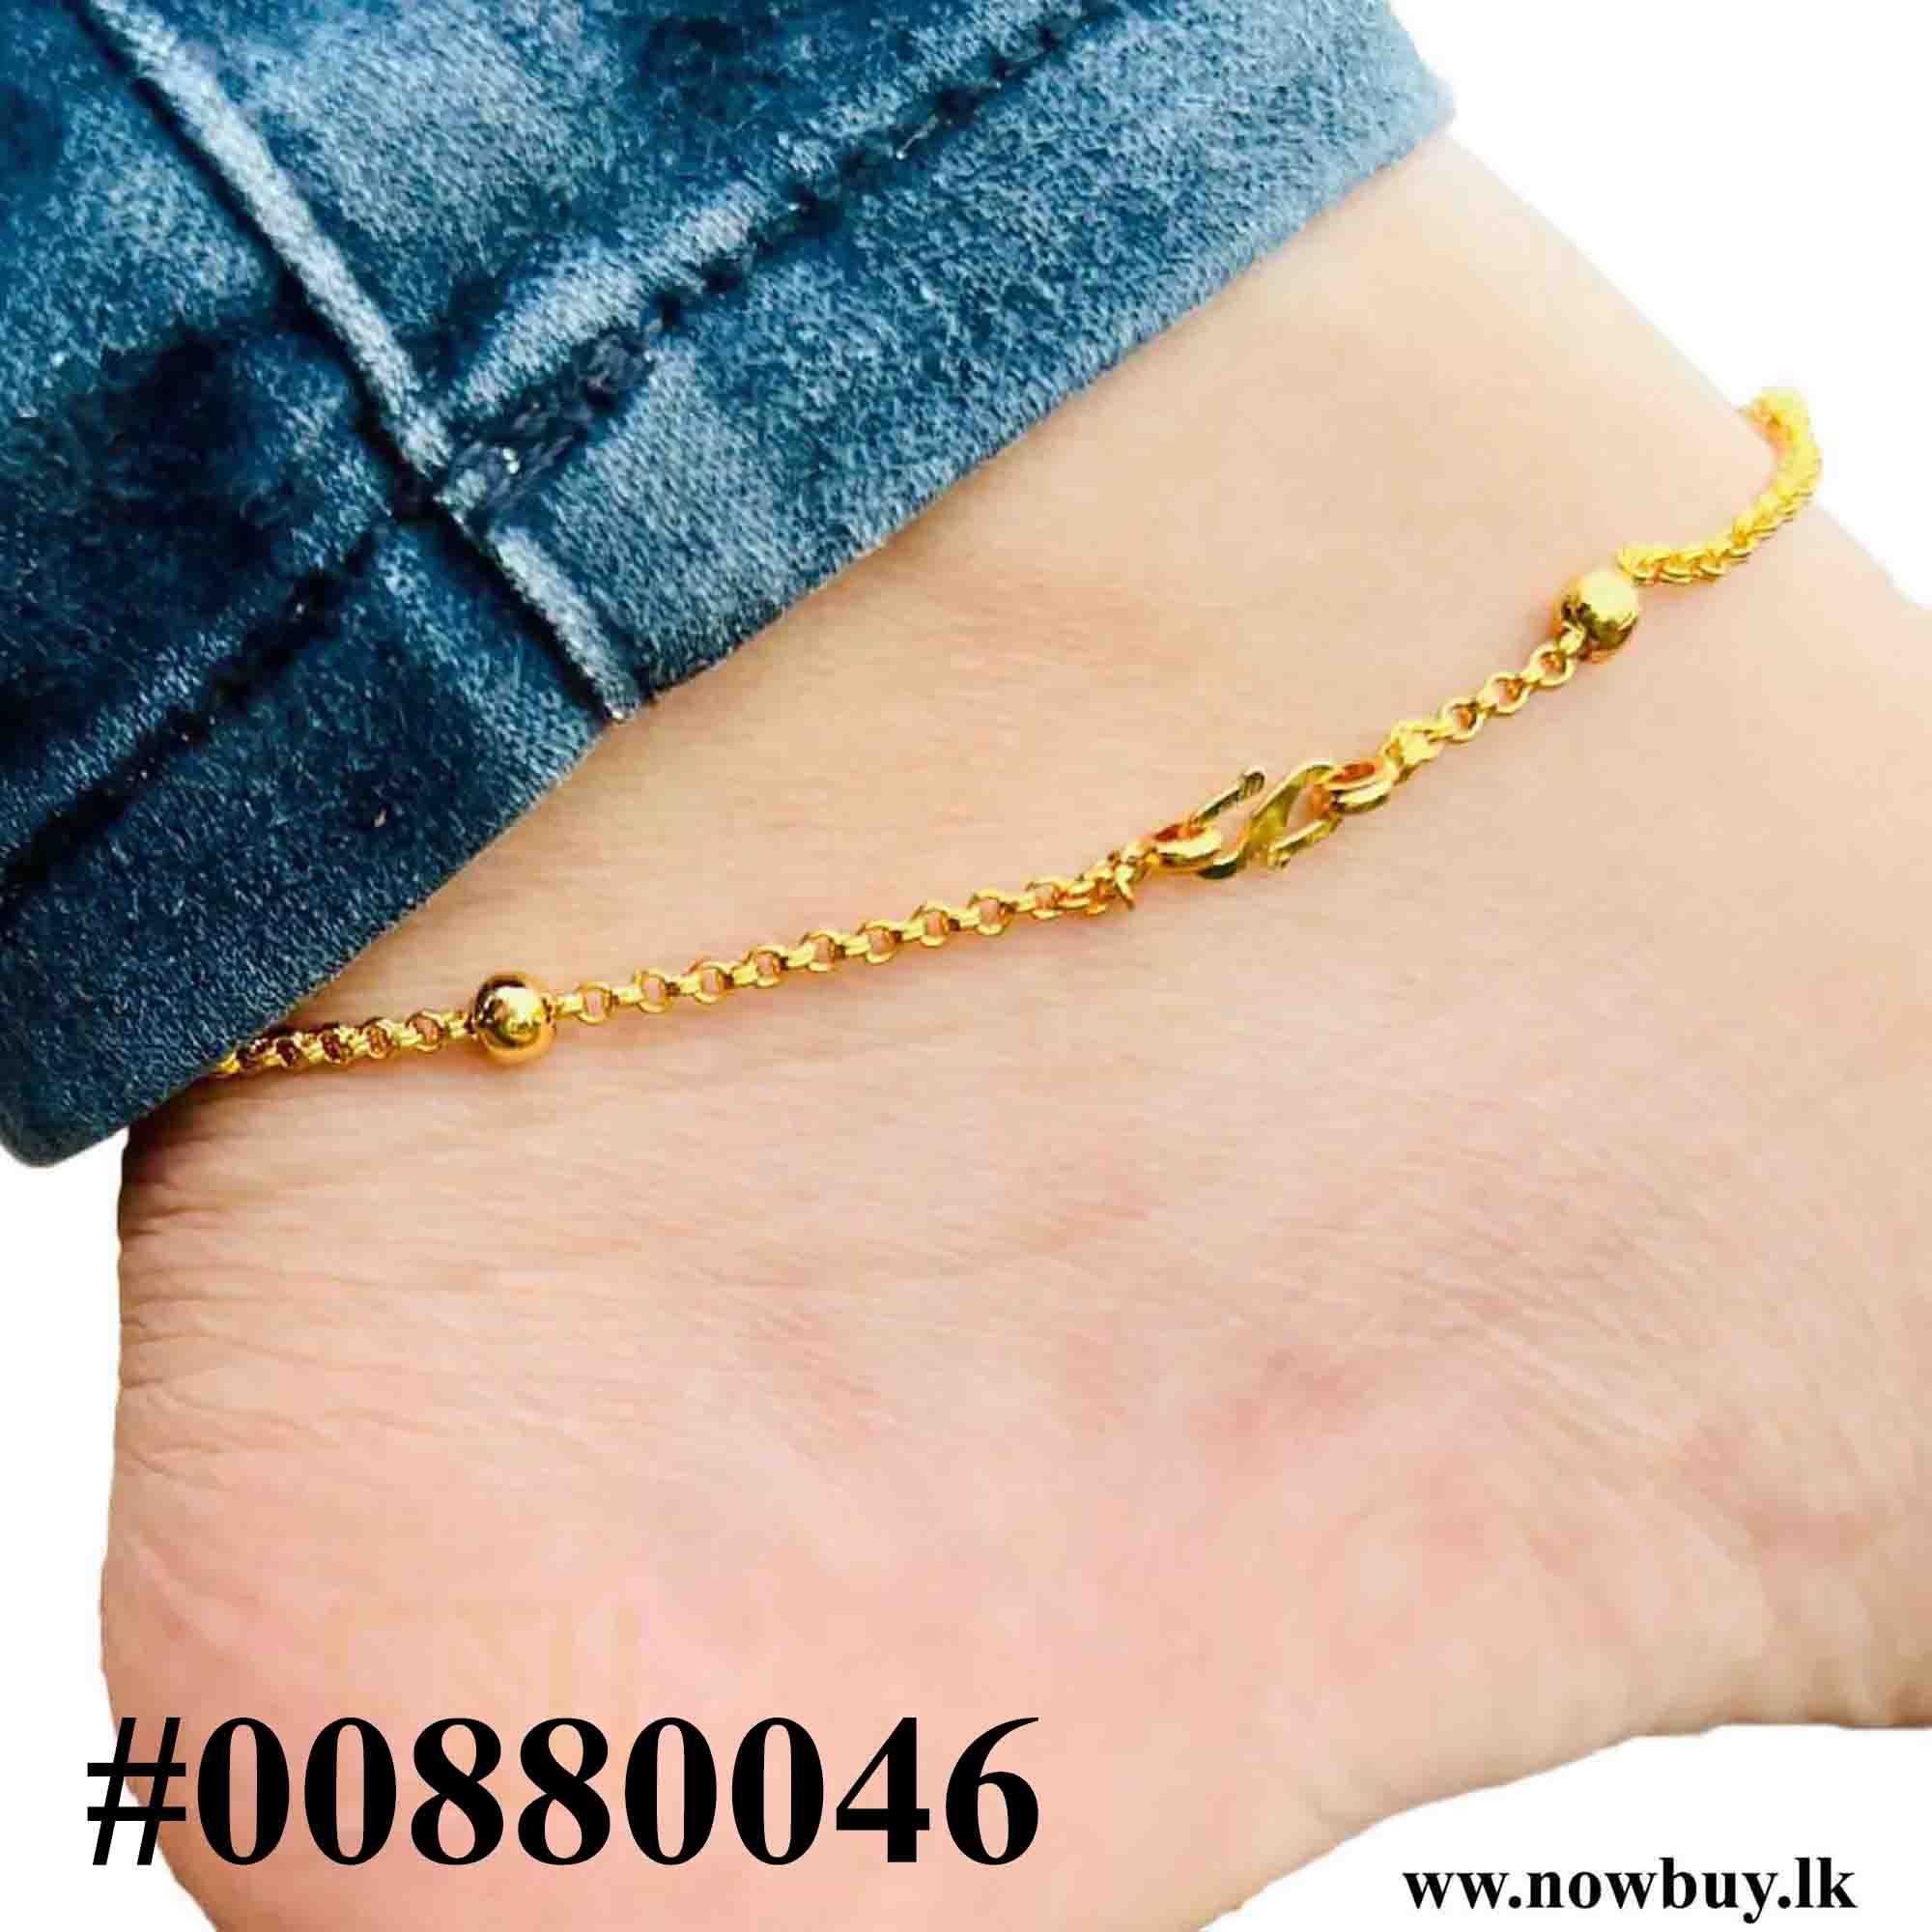 Gold Plated Ball Type Anklet Round Chain Kolusu Anklets NowBuy.lk 2